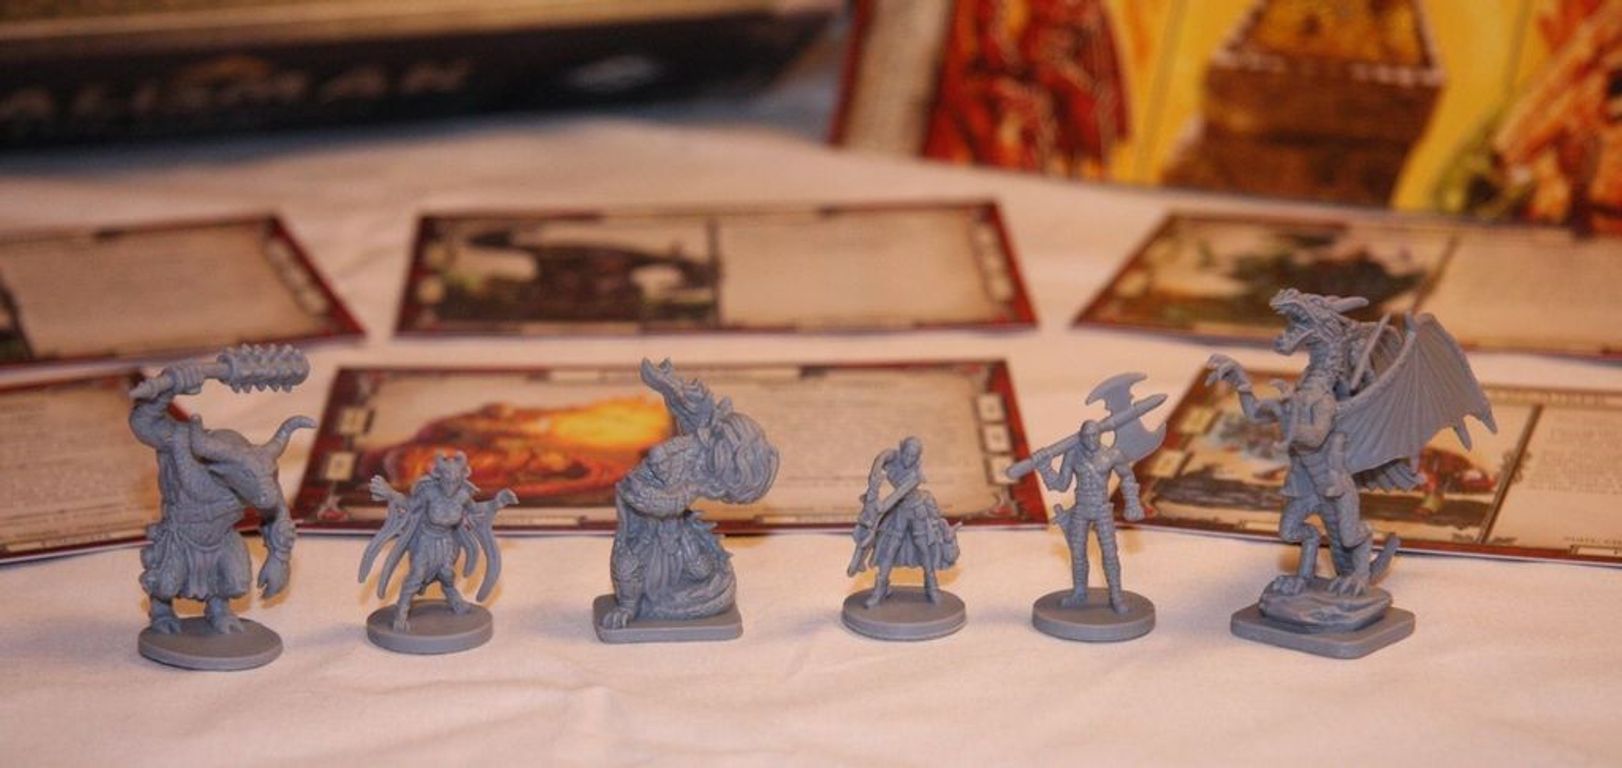 Talisman (Revised 4th Edition): The Dragon Expansion miniatures